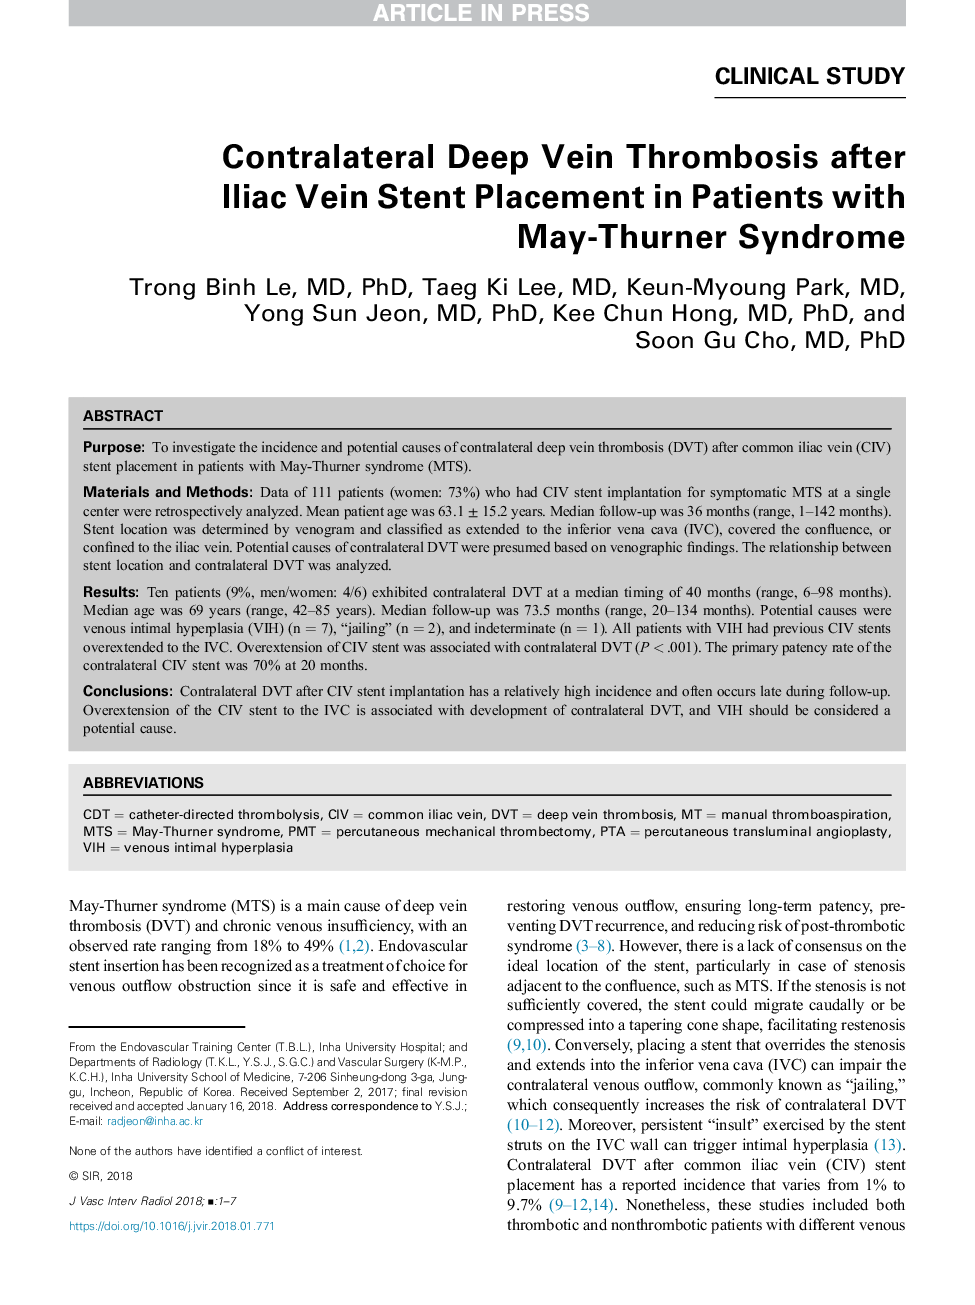 Contralateral Deep Vein Thrombosis after Iliac Vein Stent Placement in Patients with May-Thurner Syndrome